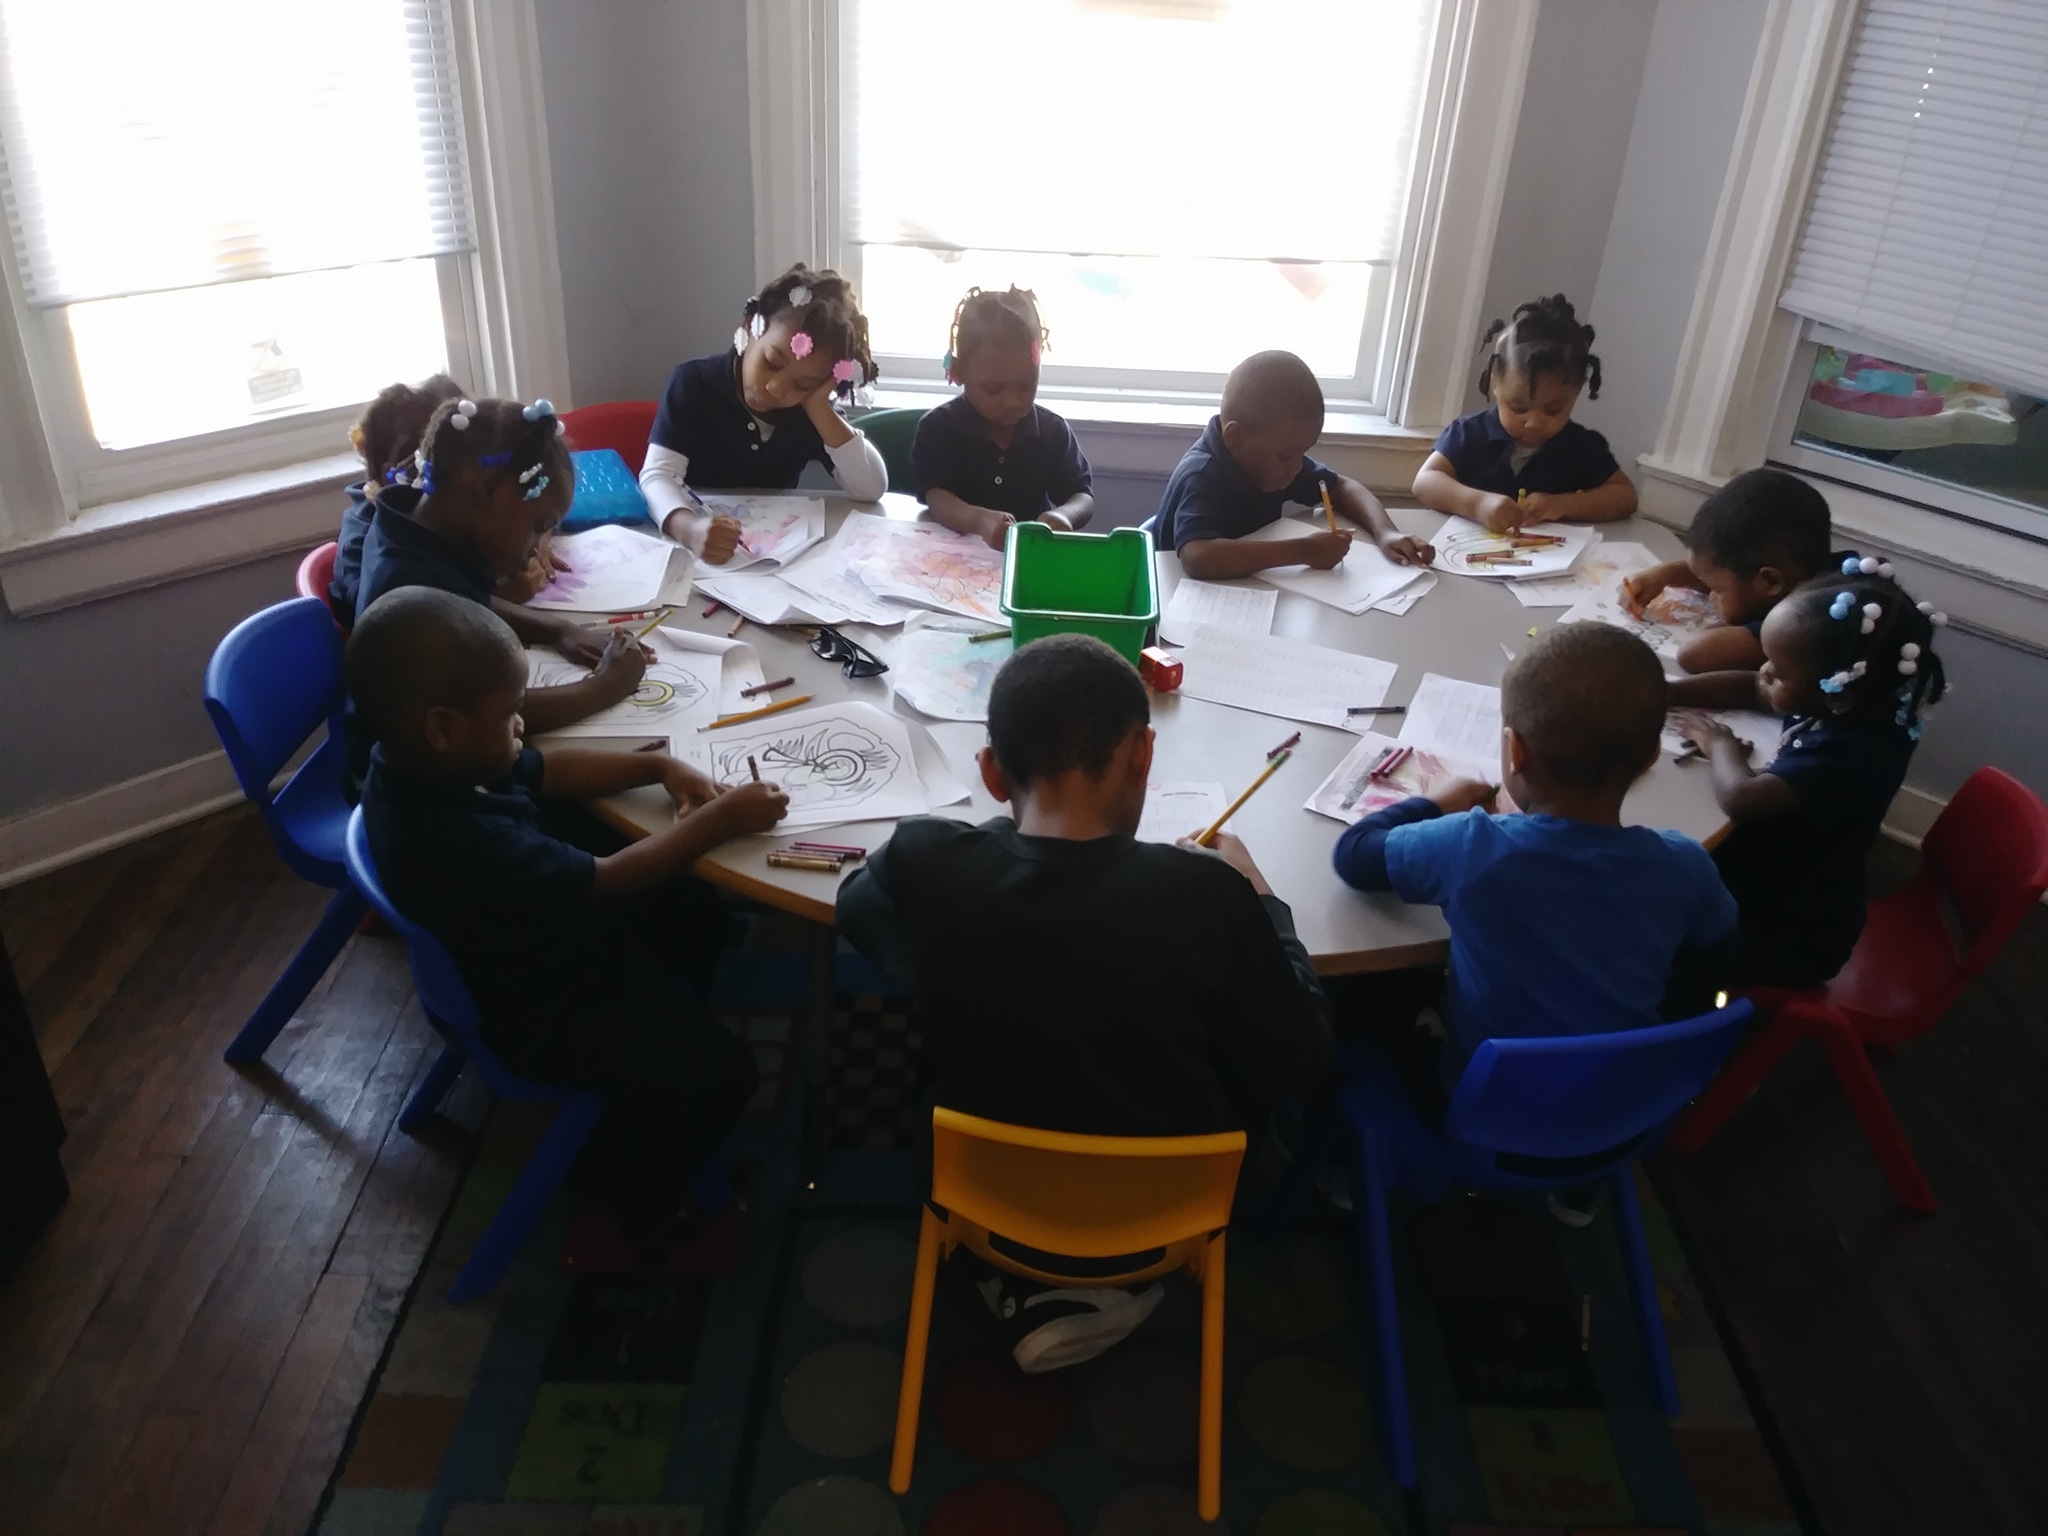 Kids Sitting Together At A Classroom Table